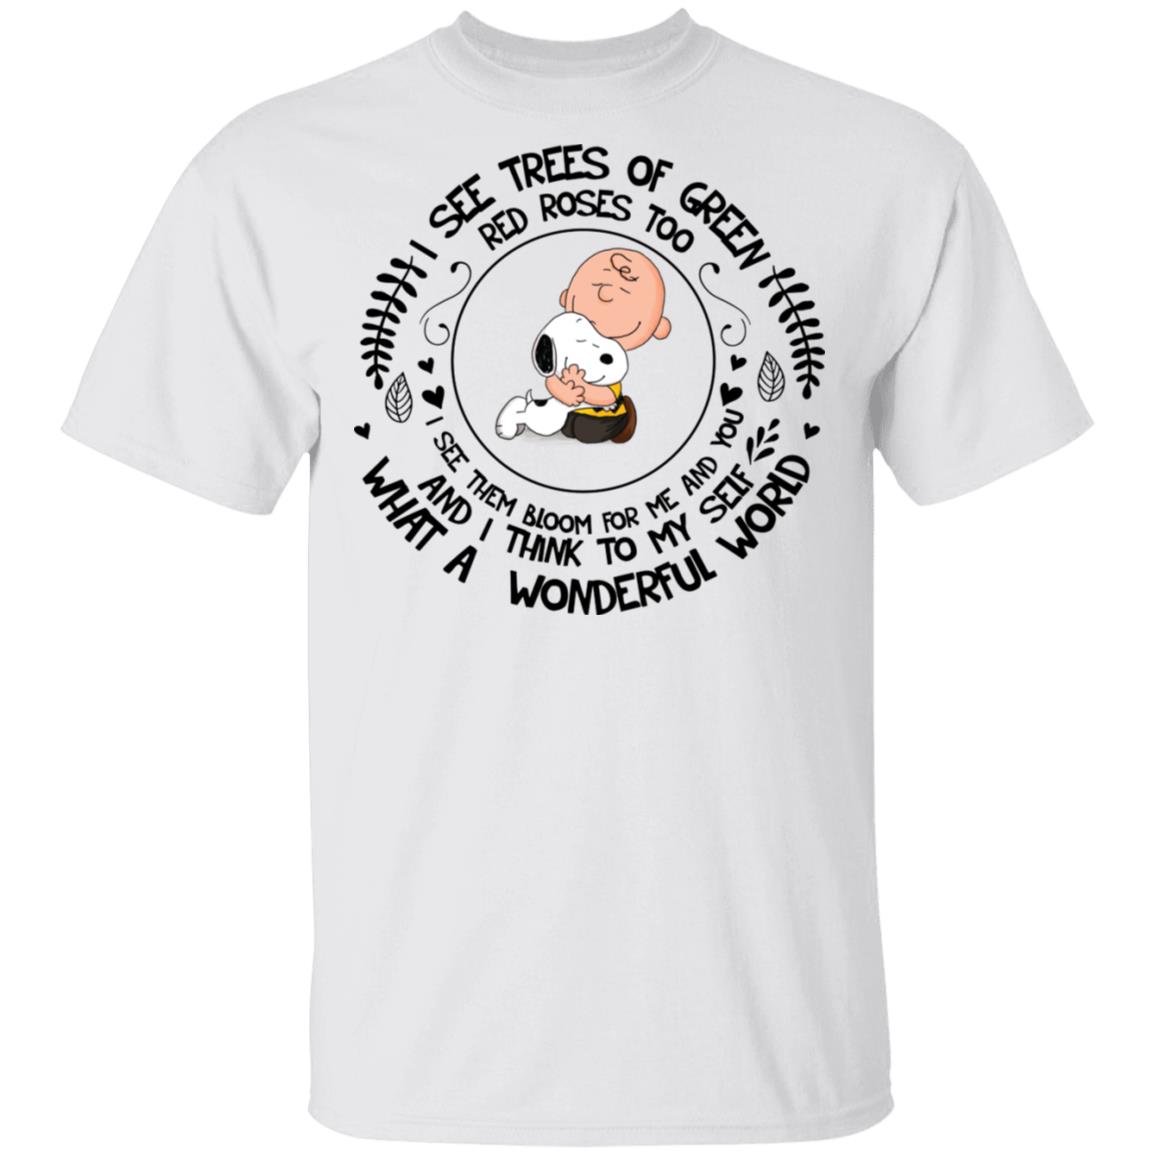 louis armstrong what a wonderful world shirt